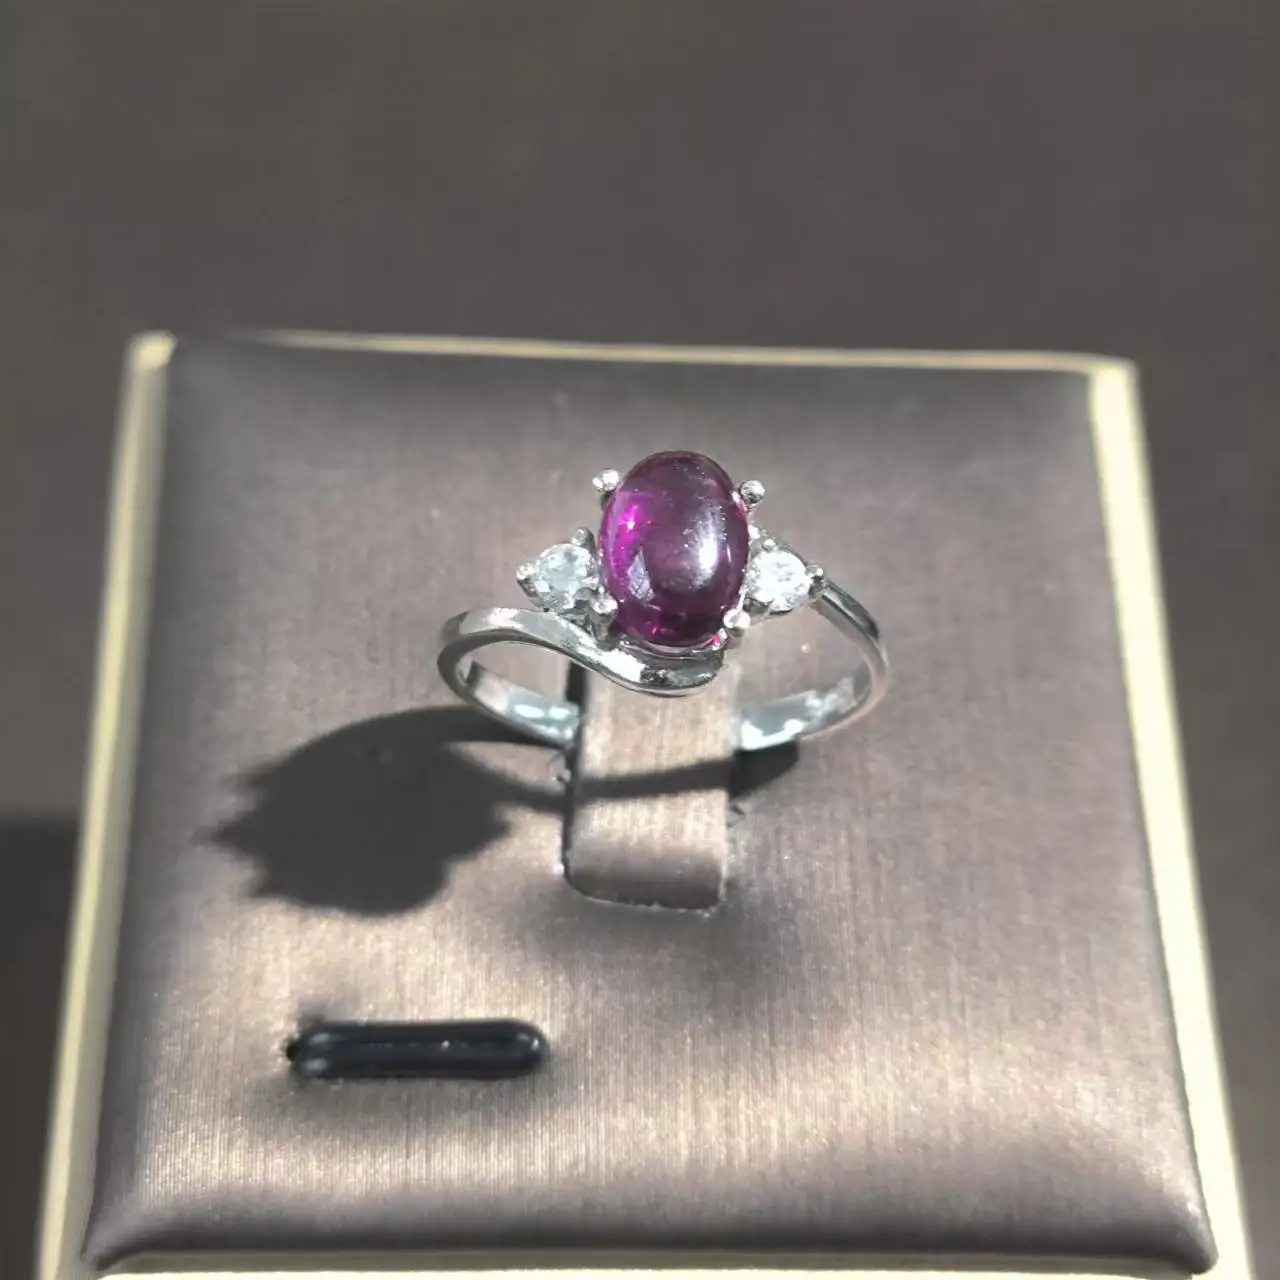 

1pcs/lot Natural Garnet Ring S925 sterling silver with diamonds Purple crystal size 7 beautiful and high quality Ladies Jewelry